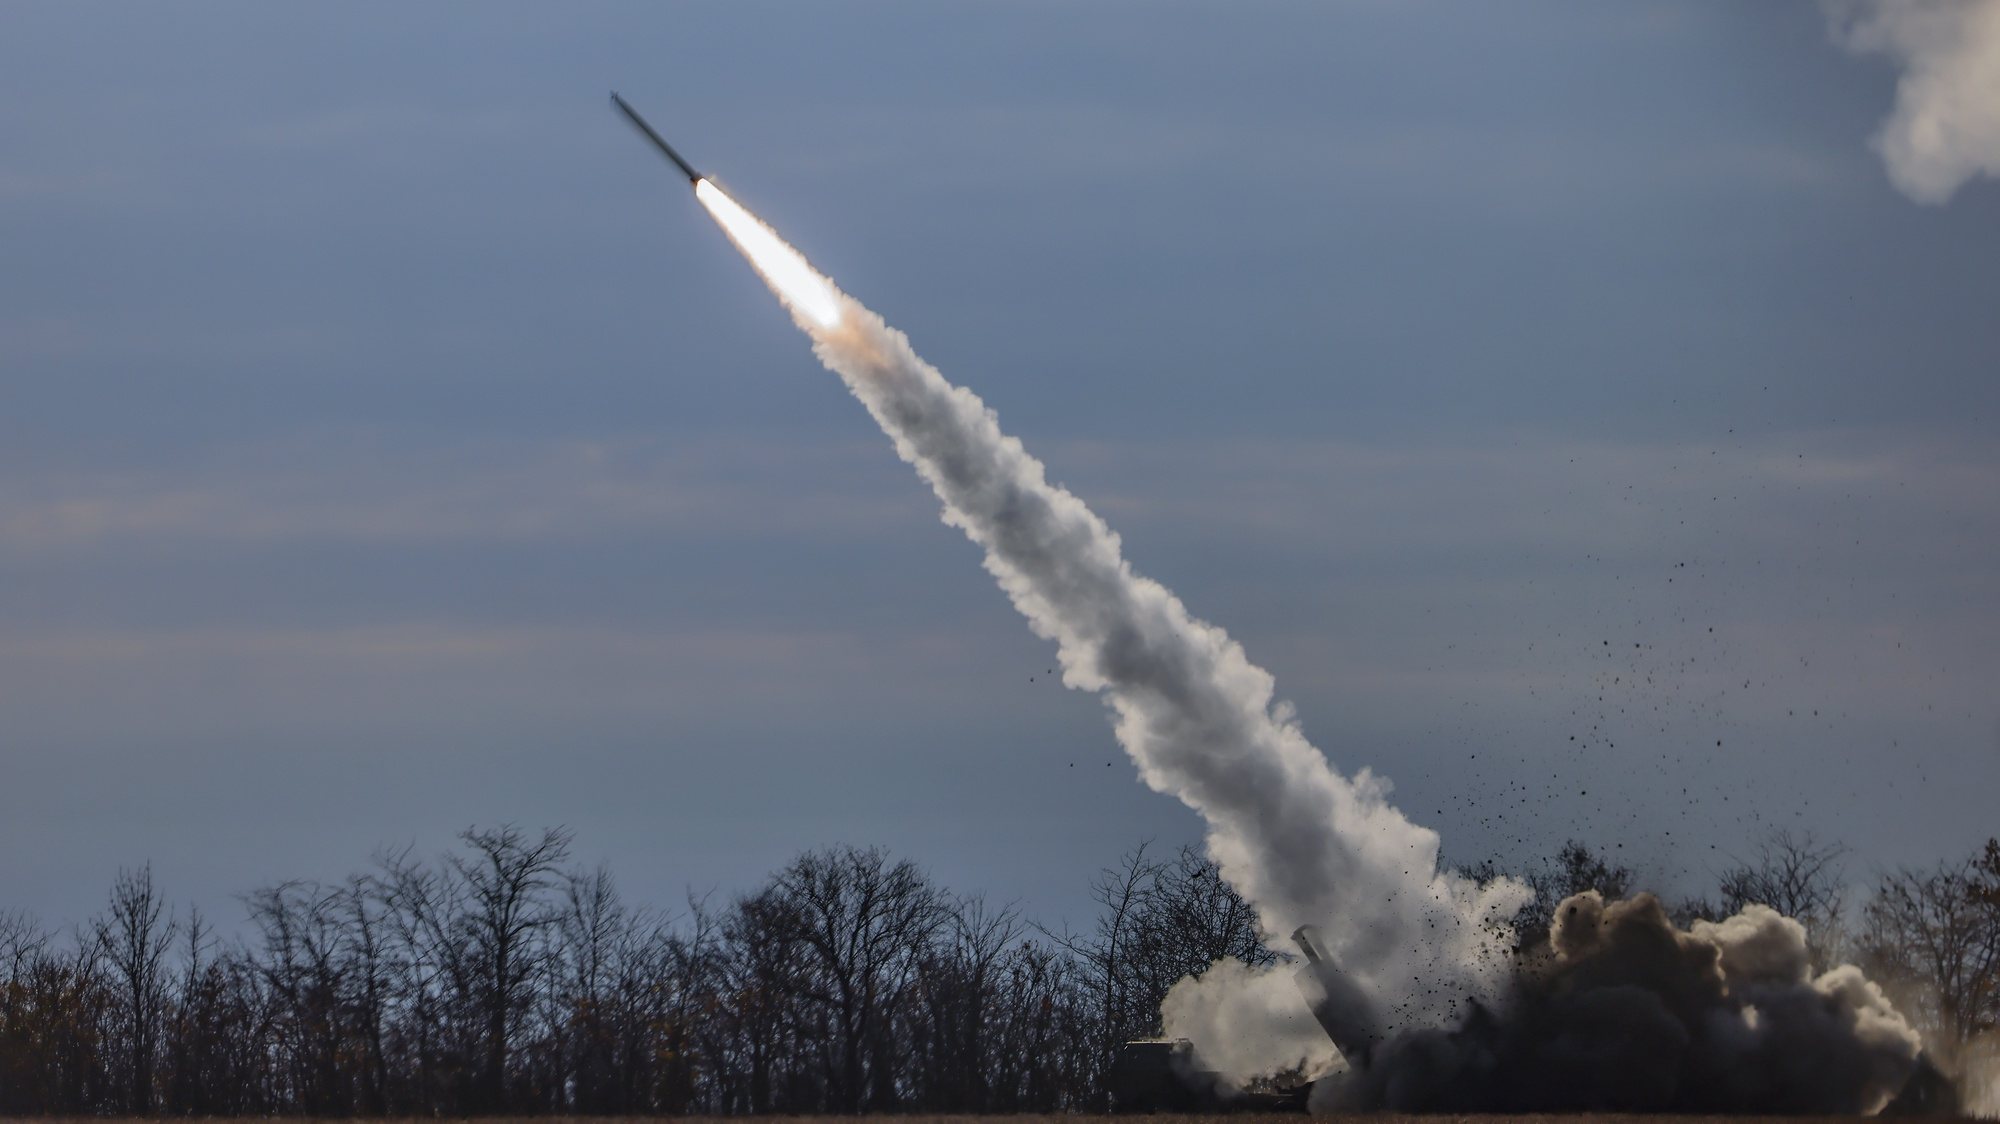 epa10292421 A High Mobility Artillery Rocket System (HIMARS) of Ukrainian army fires close to the frontline at the northern Kherson region, Ukraine, 05 November 2022 (issued 07 November 2022). Russian troops on 24 February entered Ukrainian territory, starting a conflict that has provoked destruction and a humanitarian crisis.  EPA/HANNIBAL HANSCHKE